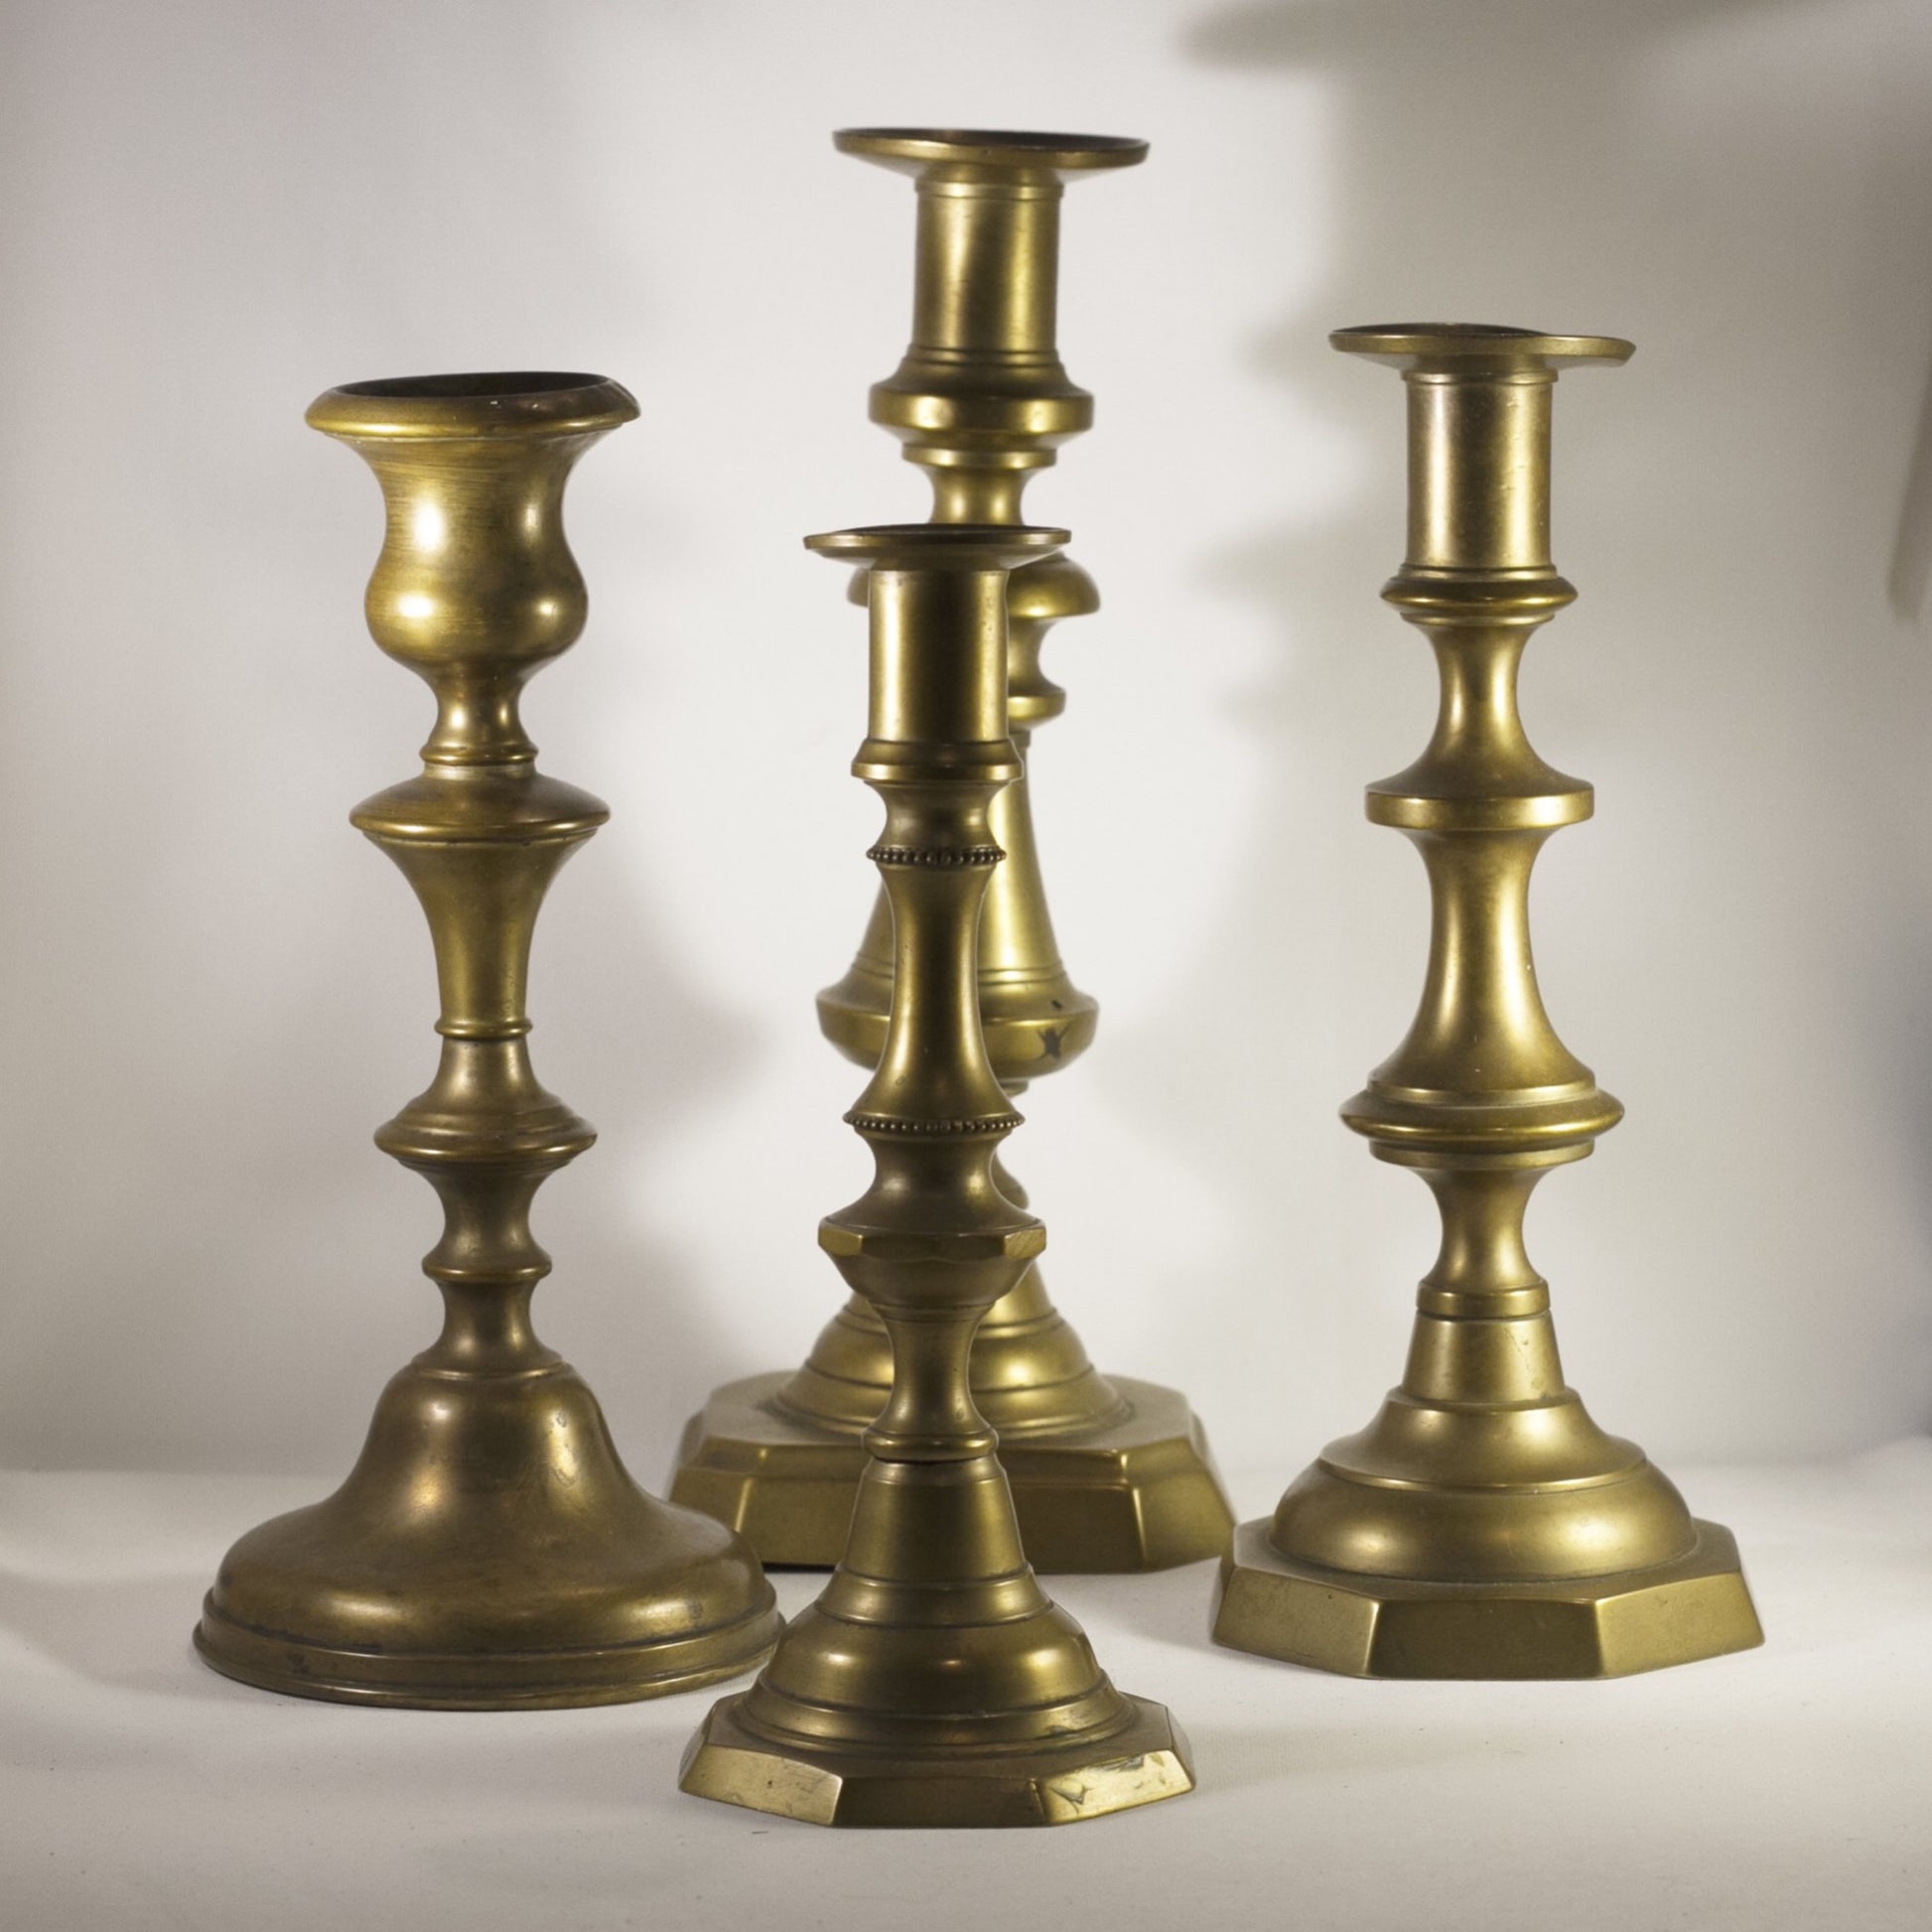 English Brass Candlestick With Push up Rods , Antique 19th Century  Victorian Brass Beehive Candlestick Holders -  Canada